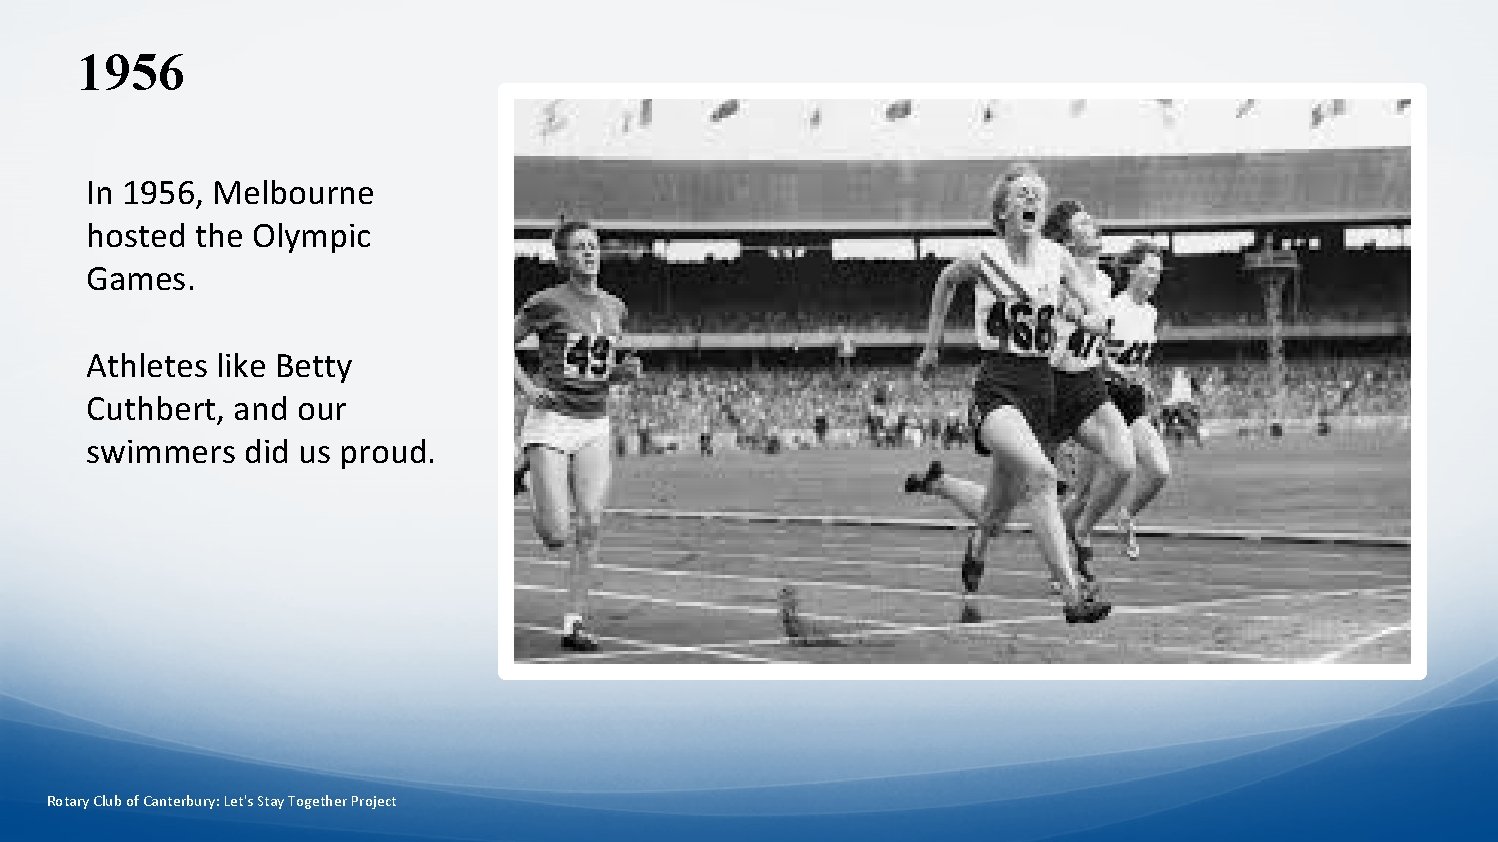 1956 In 1956, Melbourne hosted the Olympic Games. Athletes like Betty Cuthbert, and our